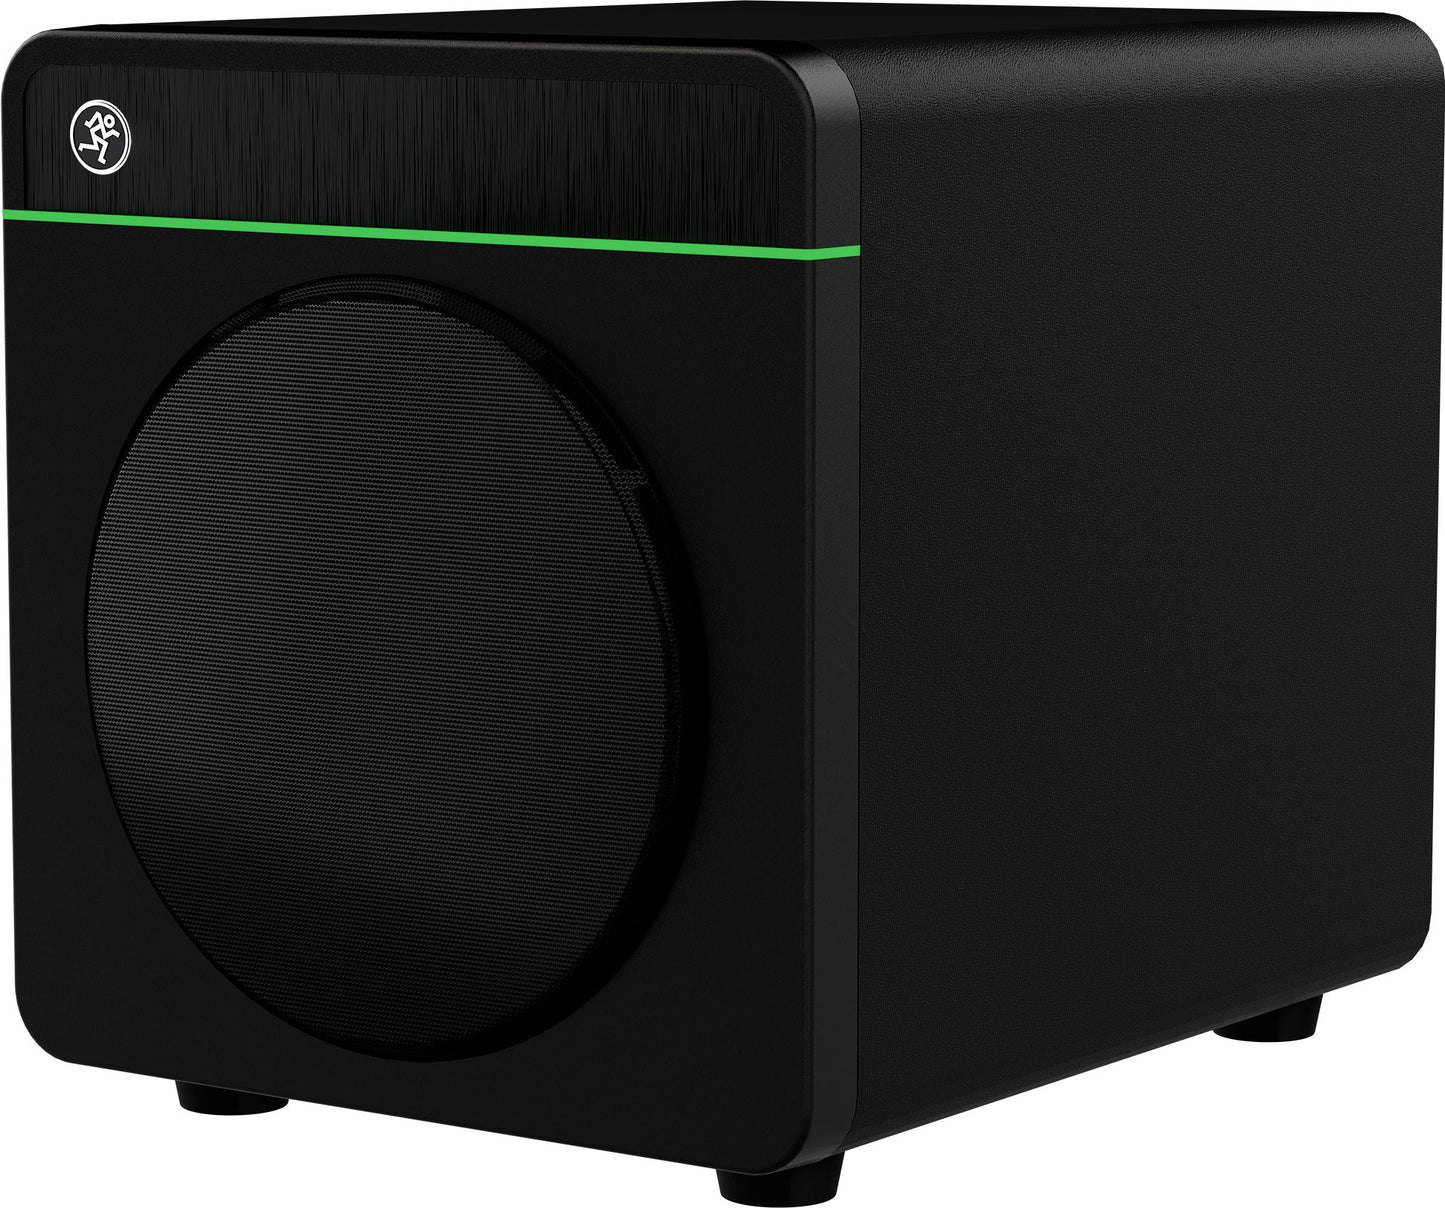 Mackie CR8S-XBT "8"" Multimedia Subwoofer with Bluetooth
and CRDV"